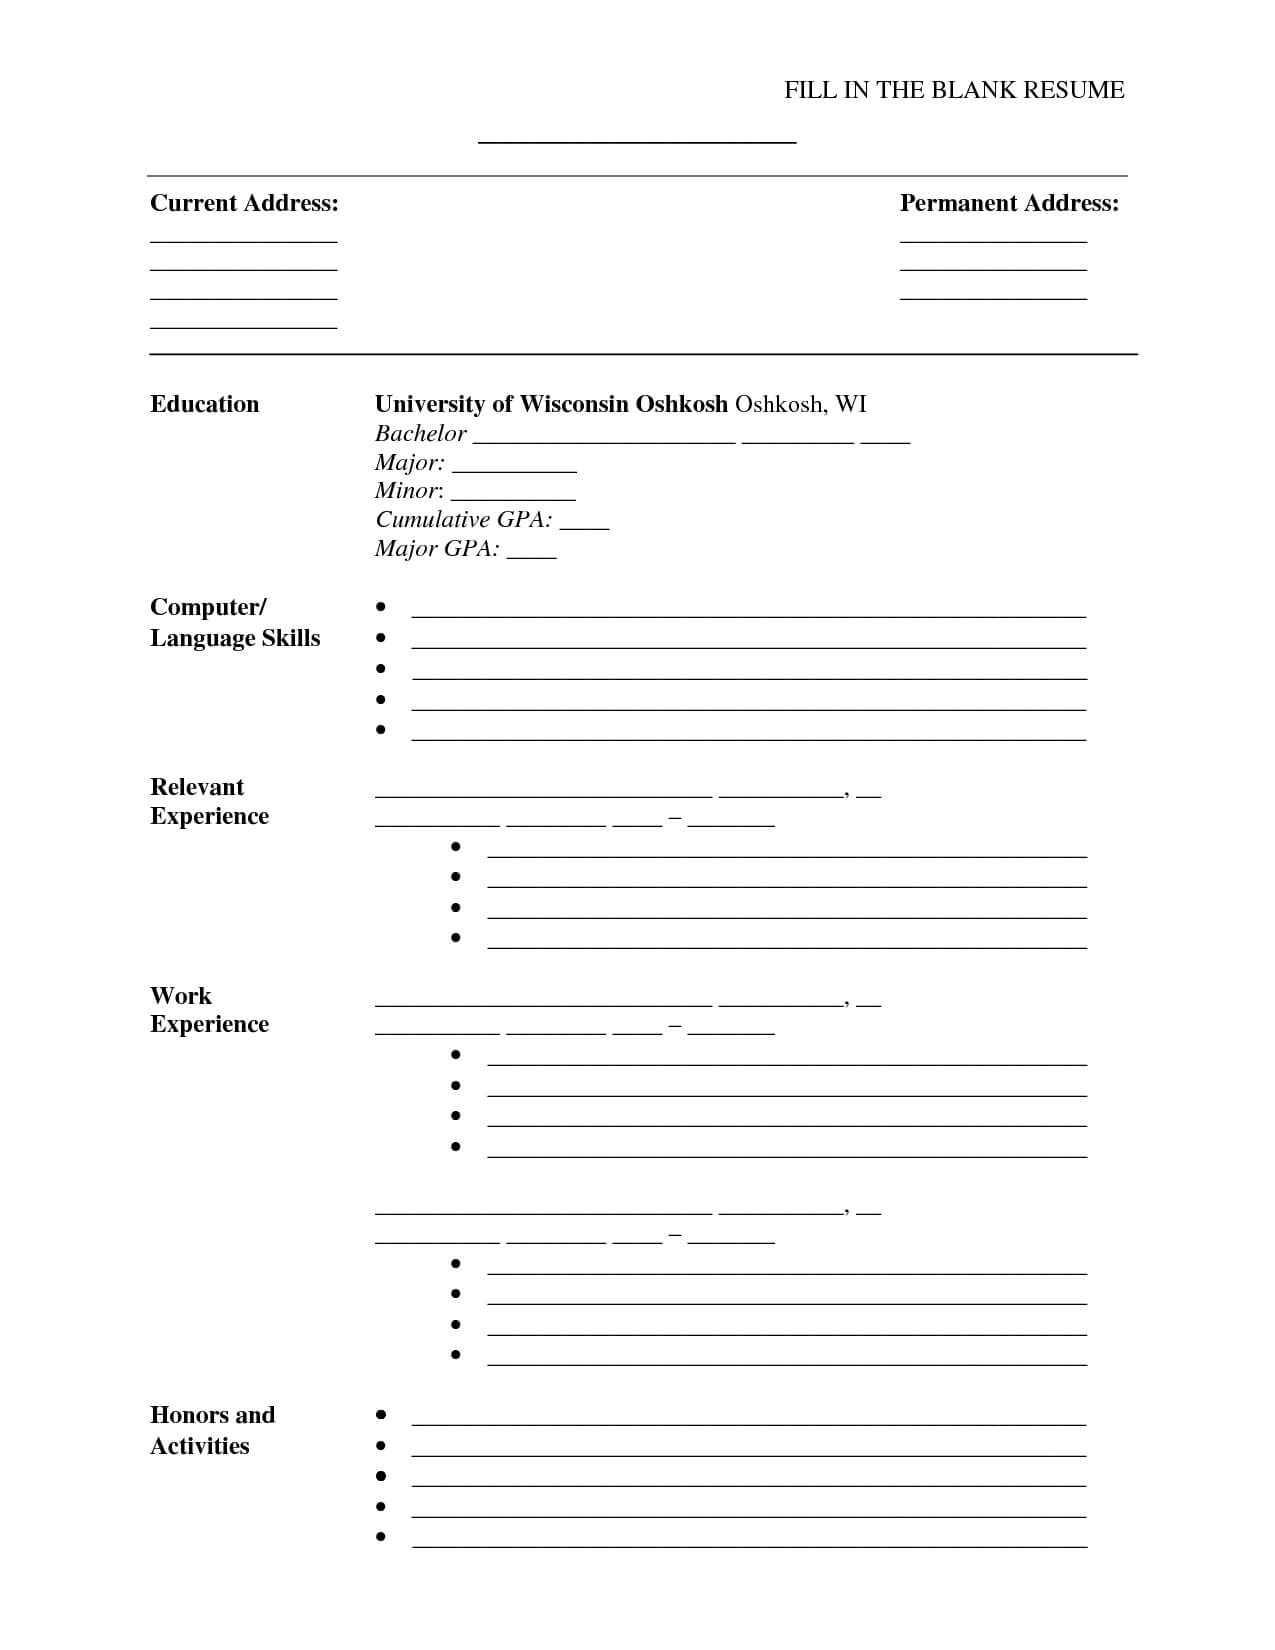 A Cv Template To Fill In | Free Printable Resume Templates With Free Blank Resume Templates For Microsoft Word